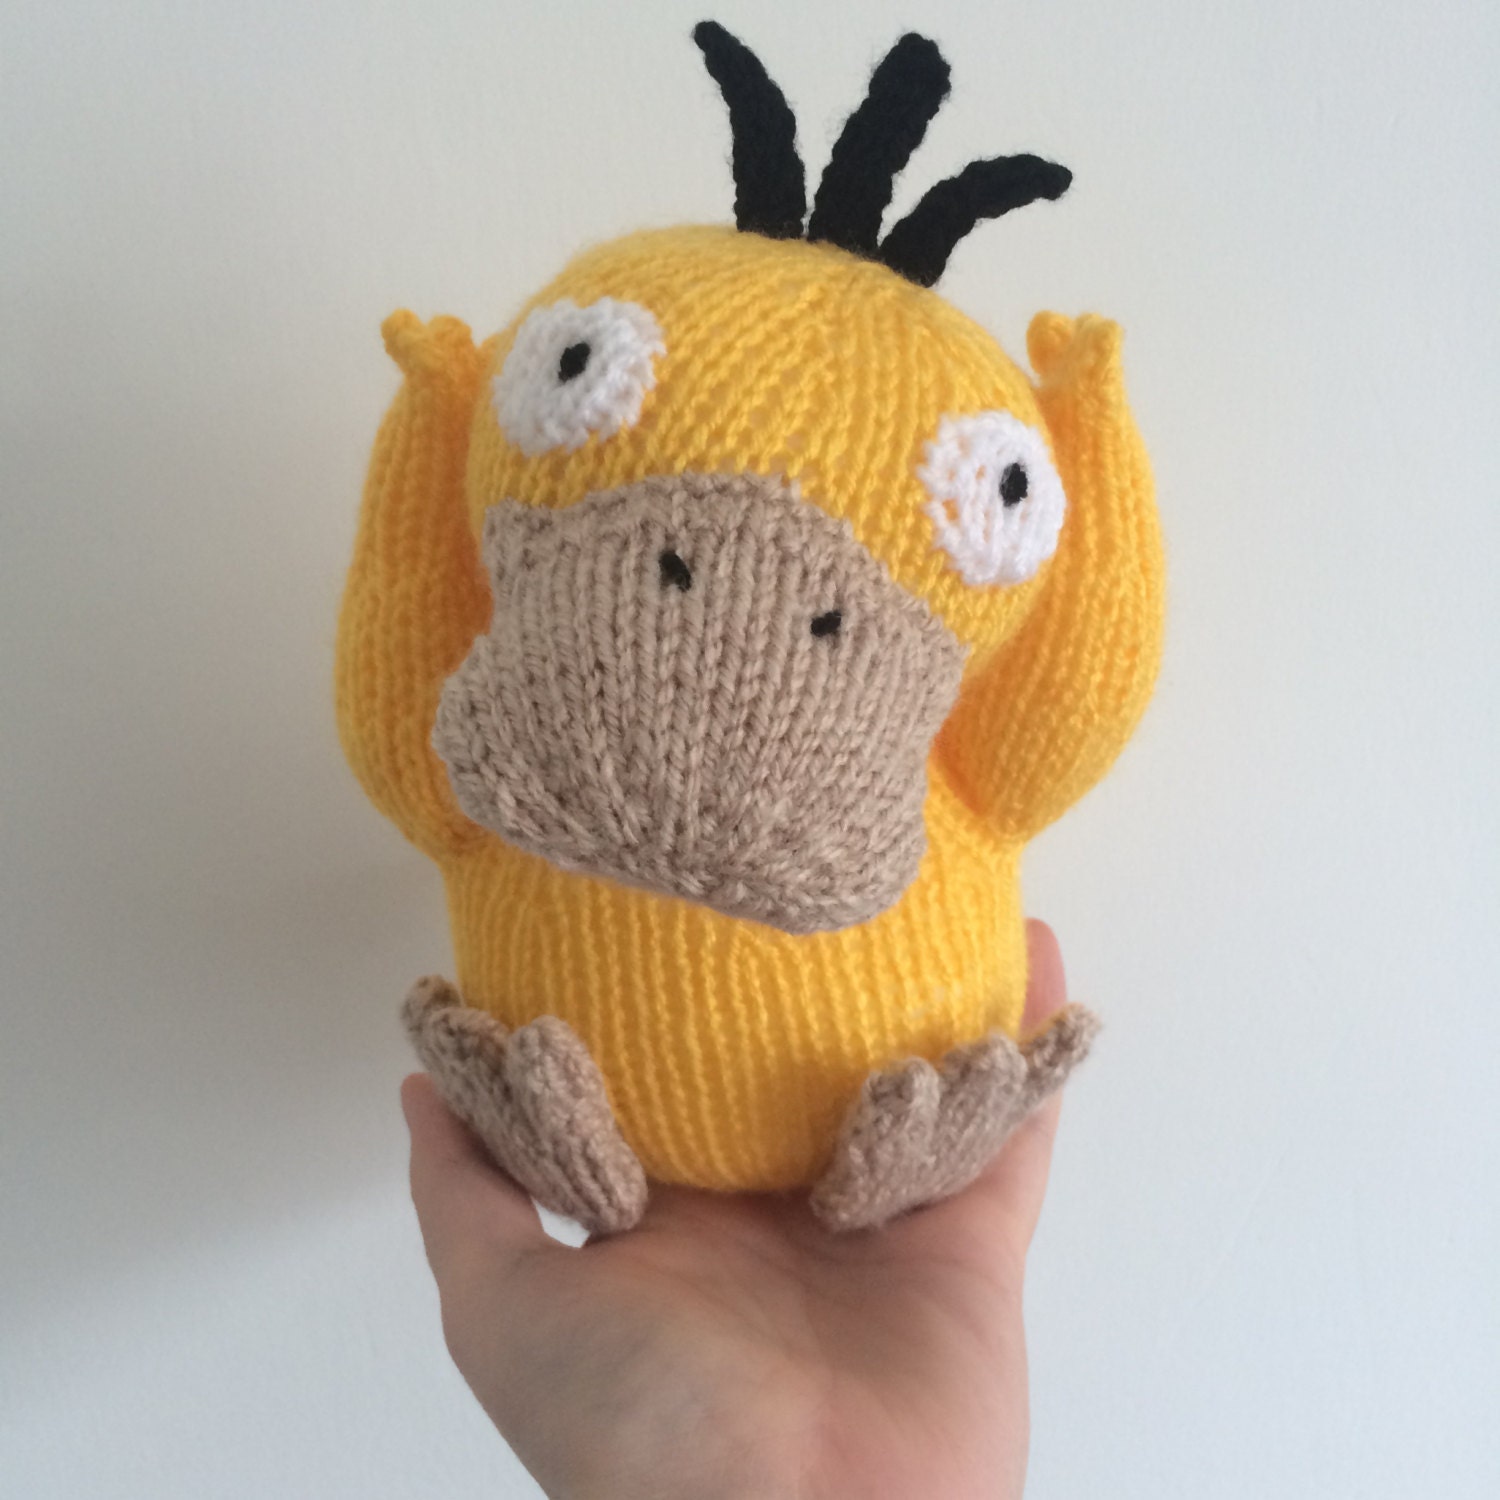 Psyduck amigurumi - Completed Projects - the Lettuce Craft Forums